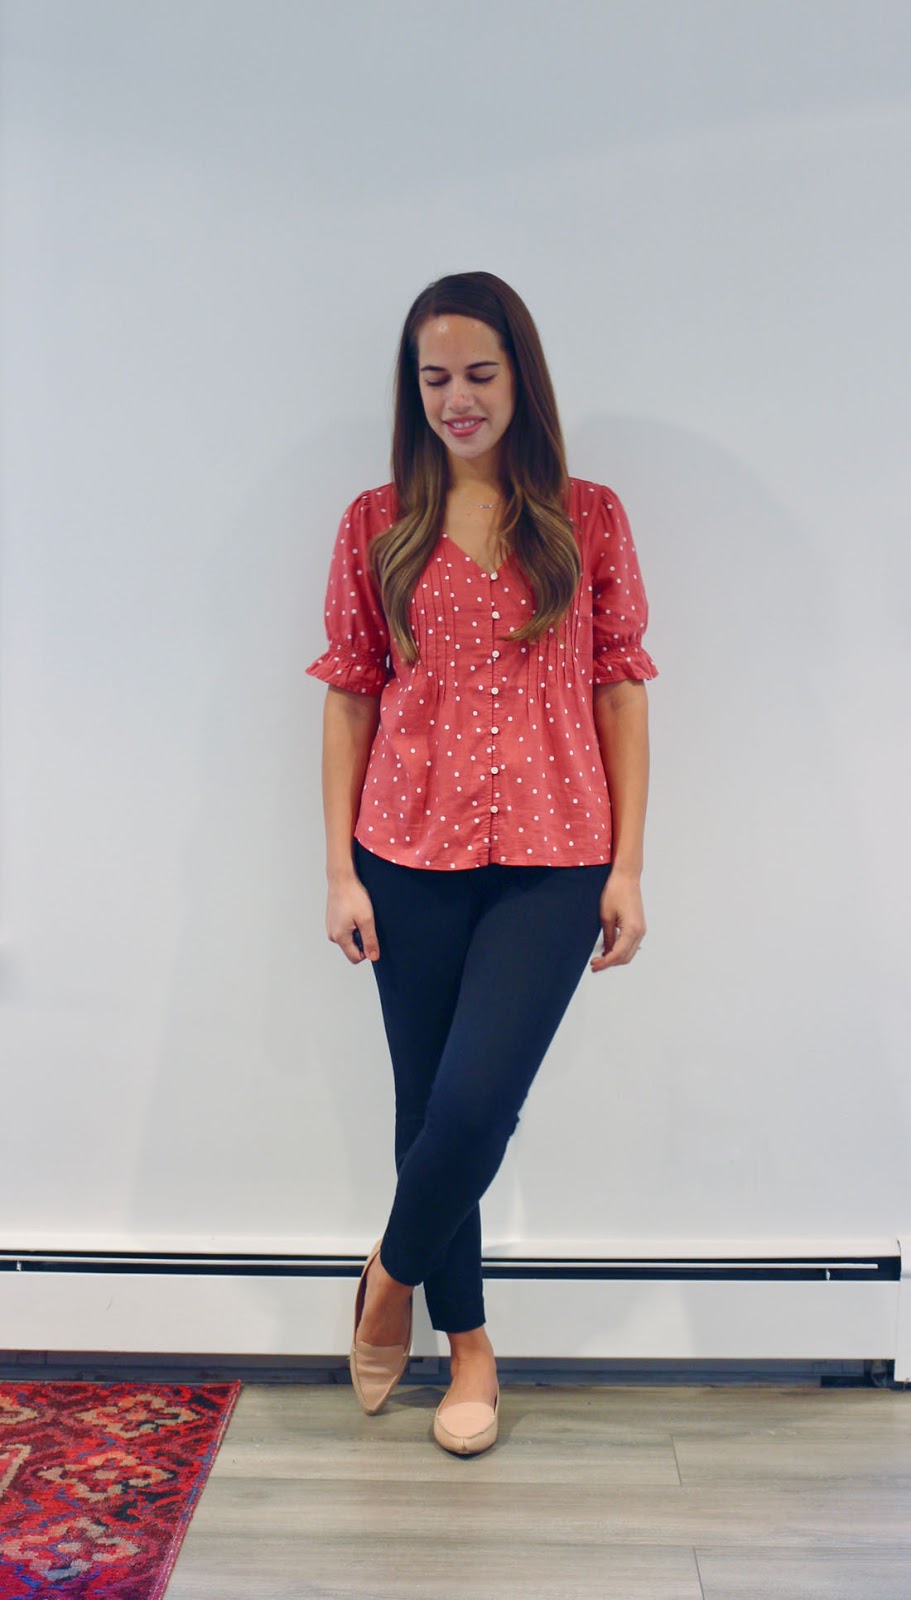 Jules in Flats -  Polka Dot Button Front Top (Business Casual Summer Workwear on a Budget)